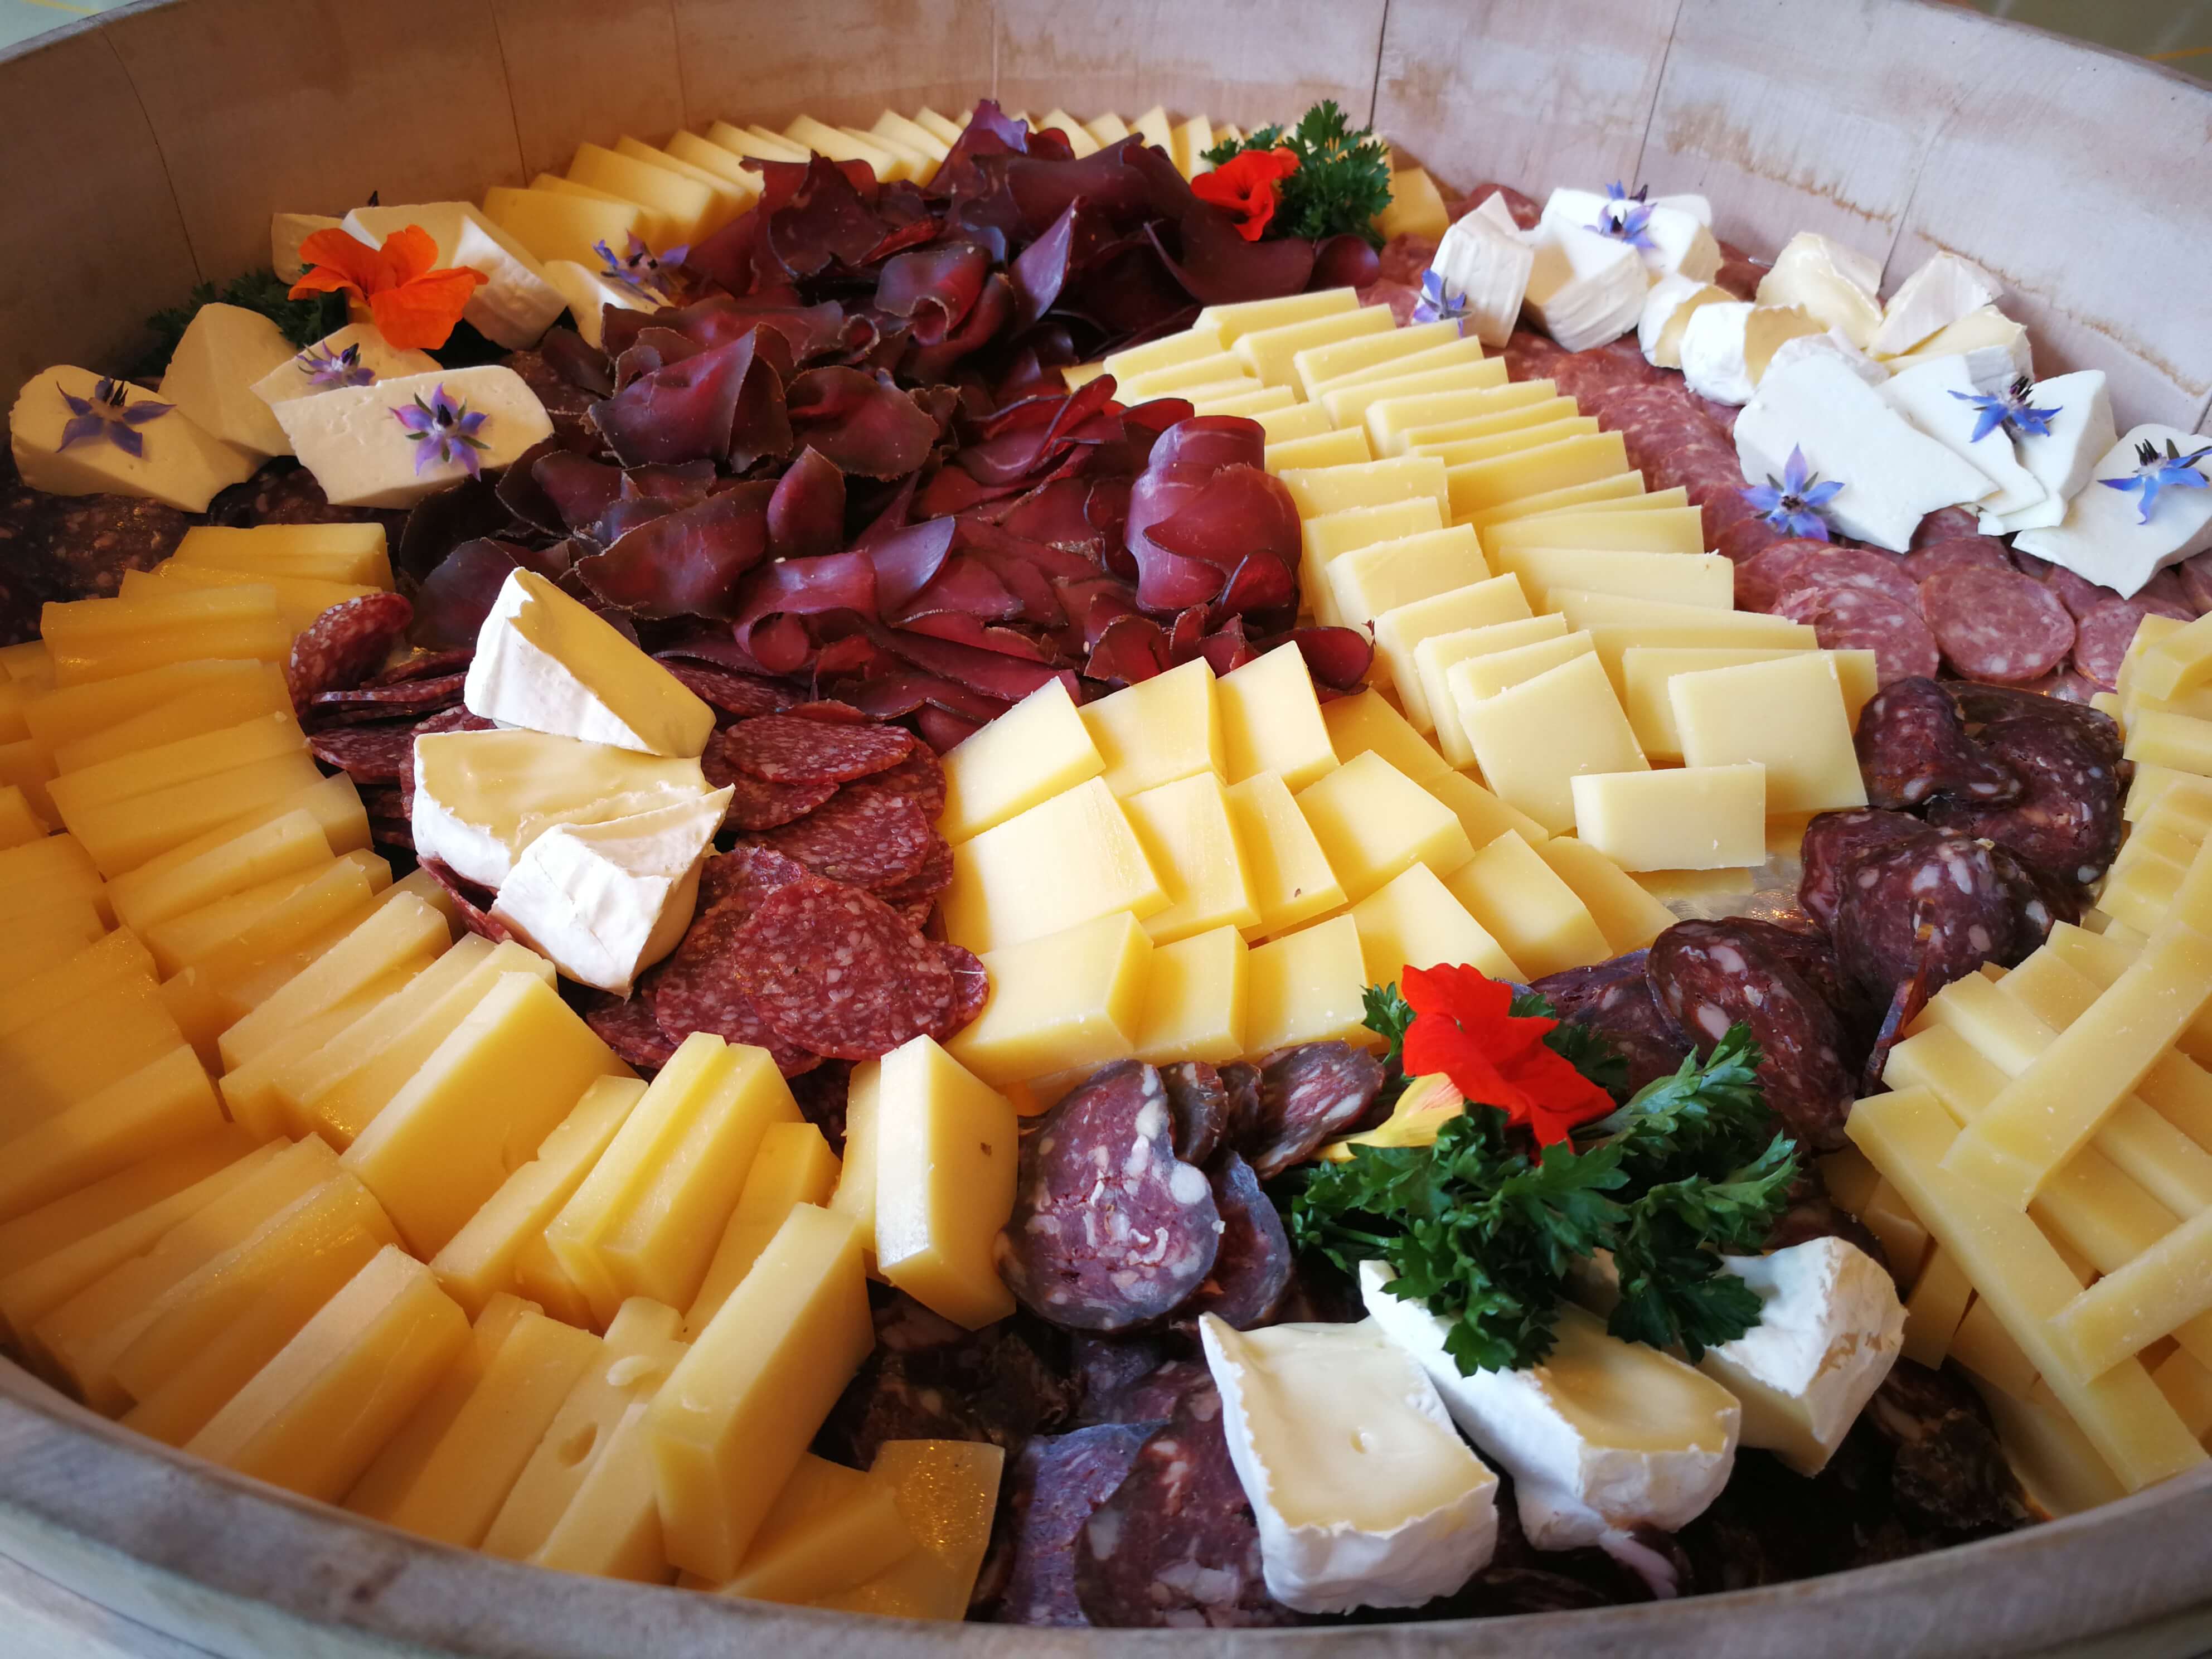 Meat and cheese platters can be ordered from the «Buurelädeli» farmers shop